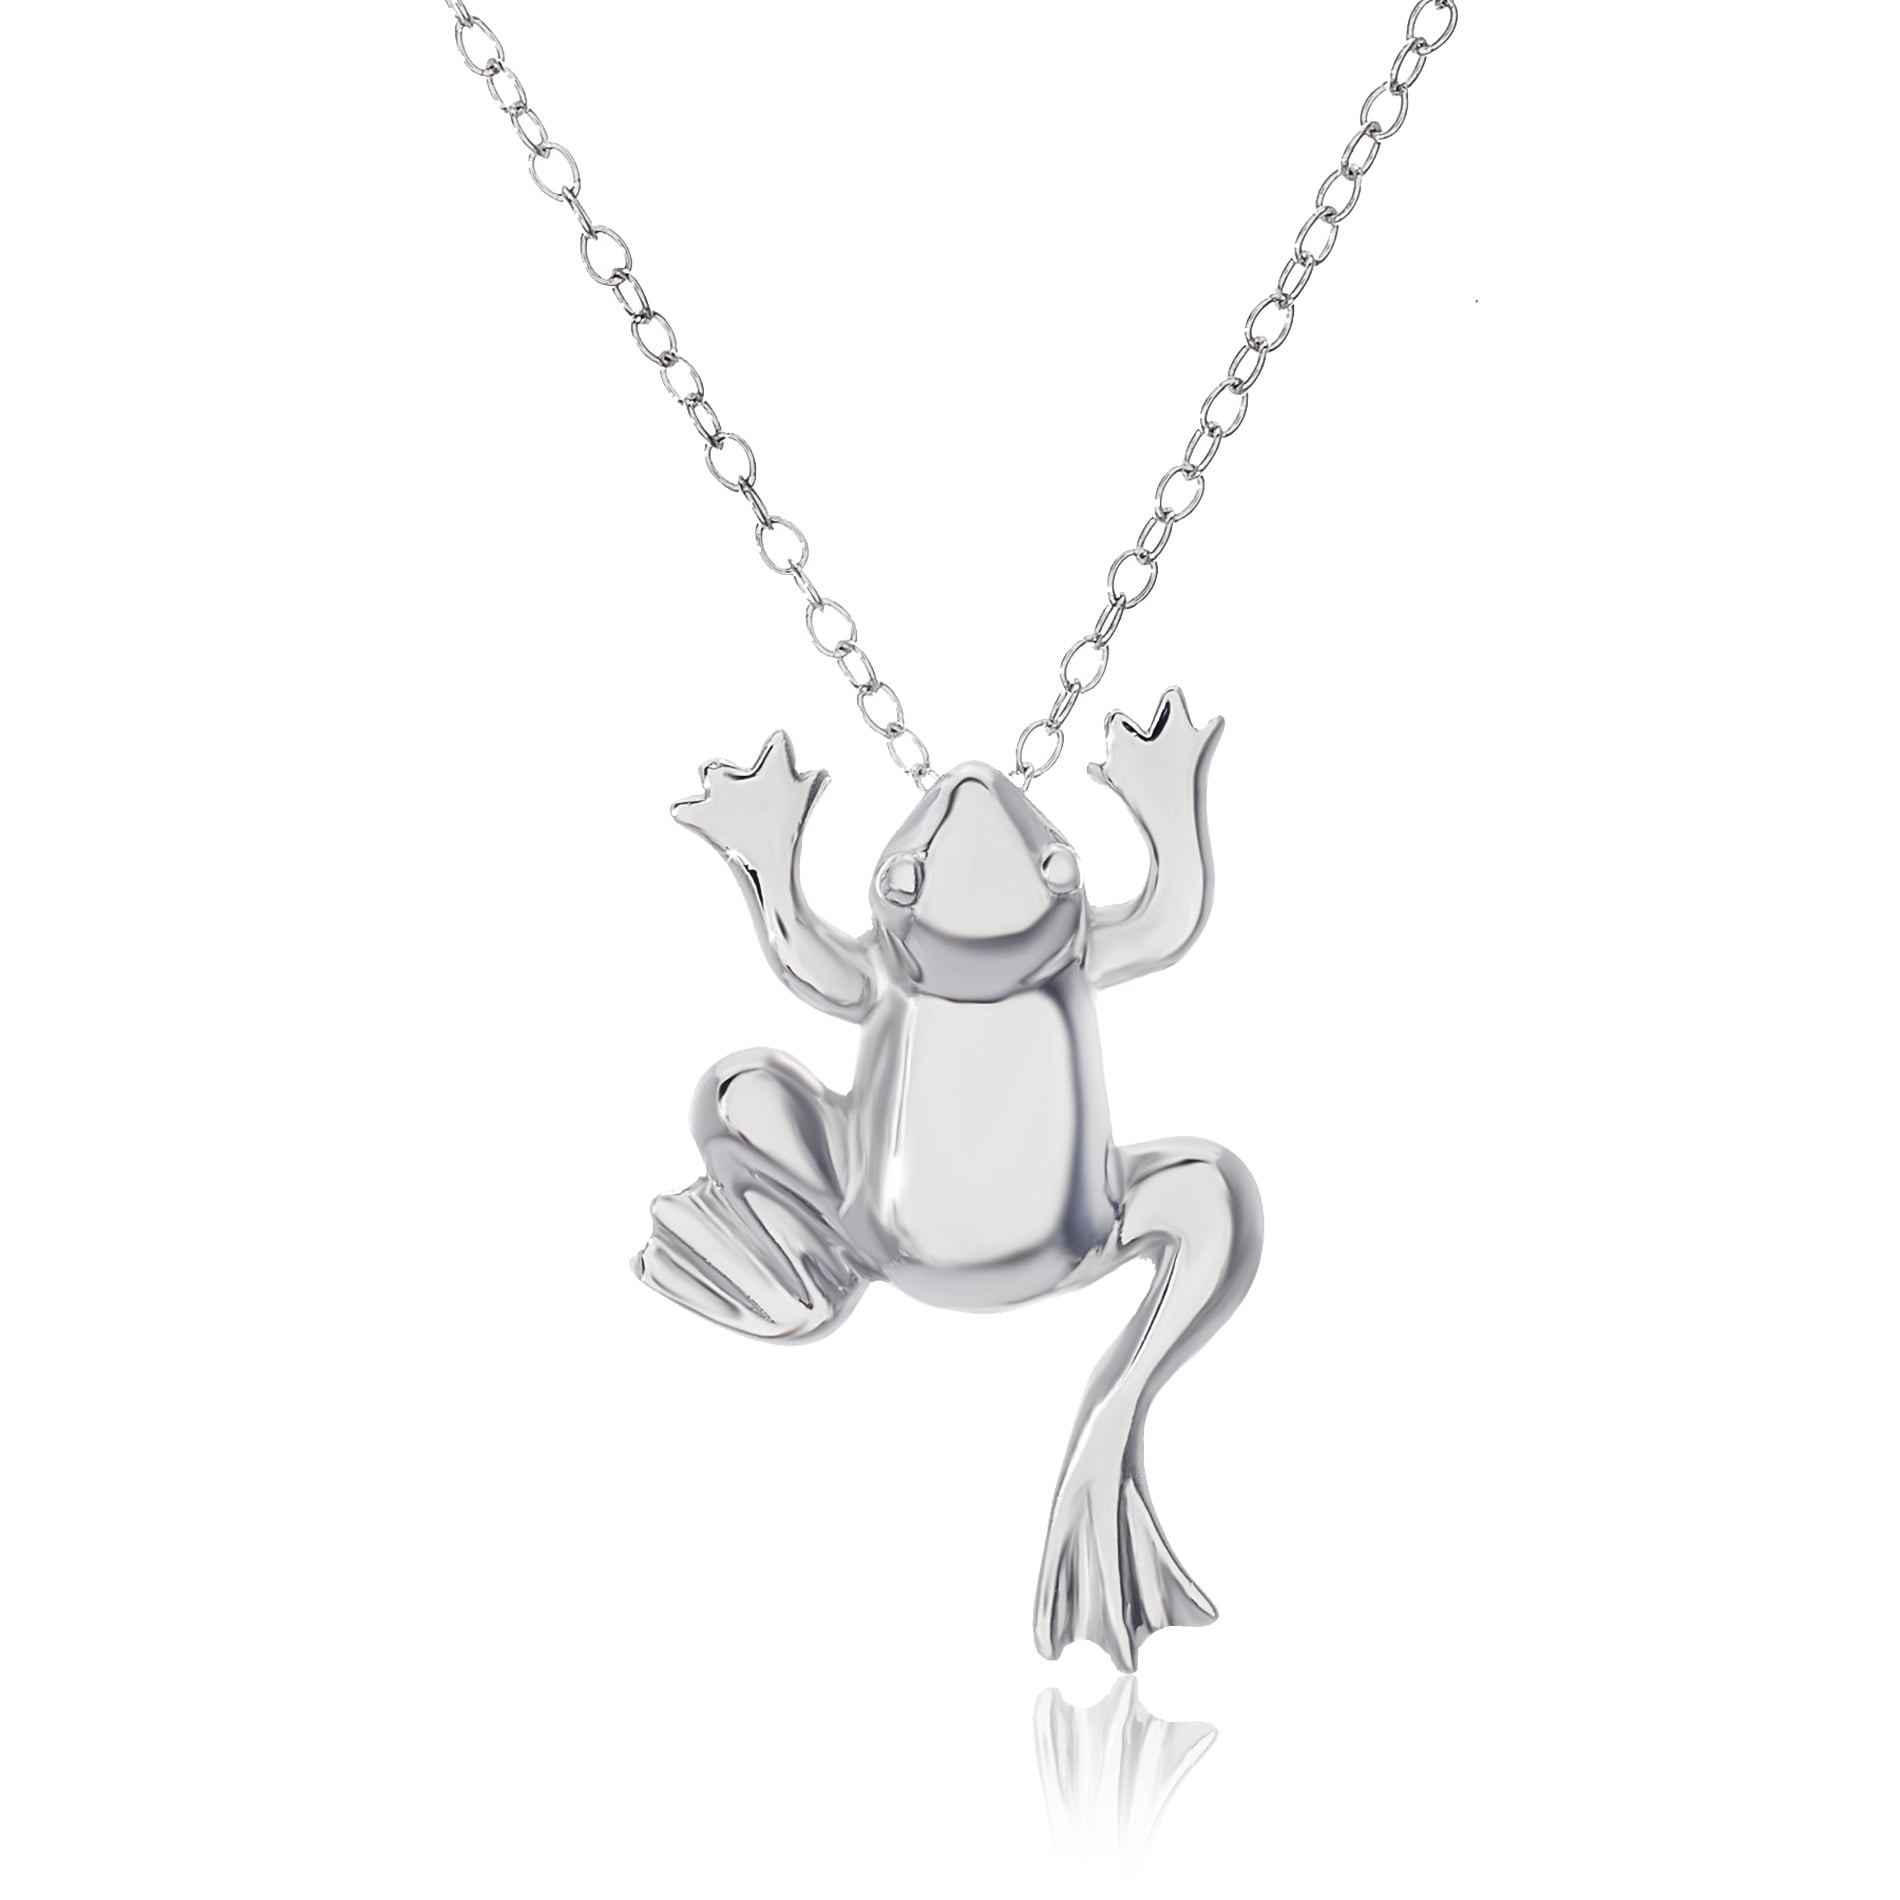 8 Metal Climbing Frog Charms Antique Silver Tone